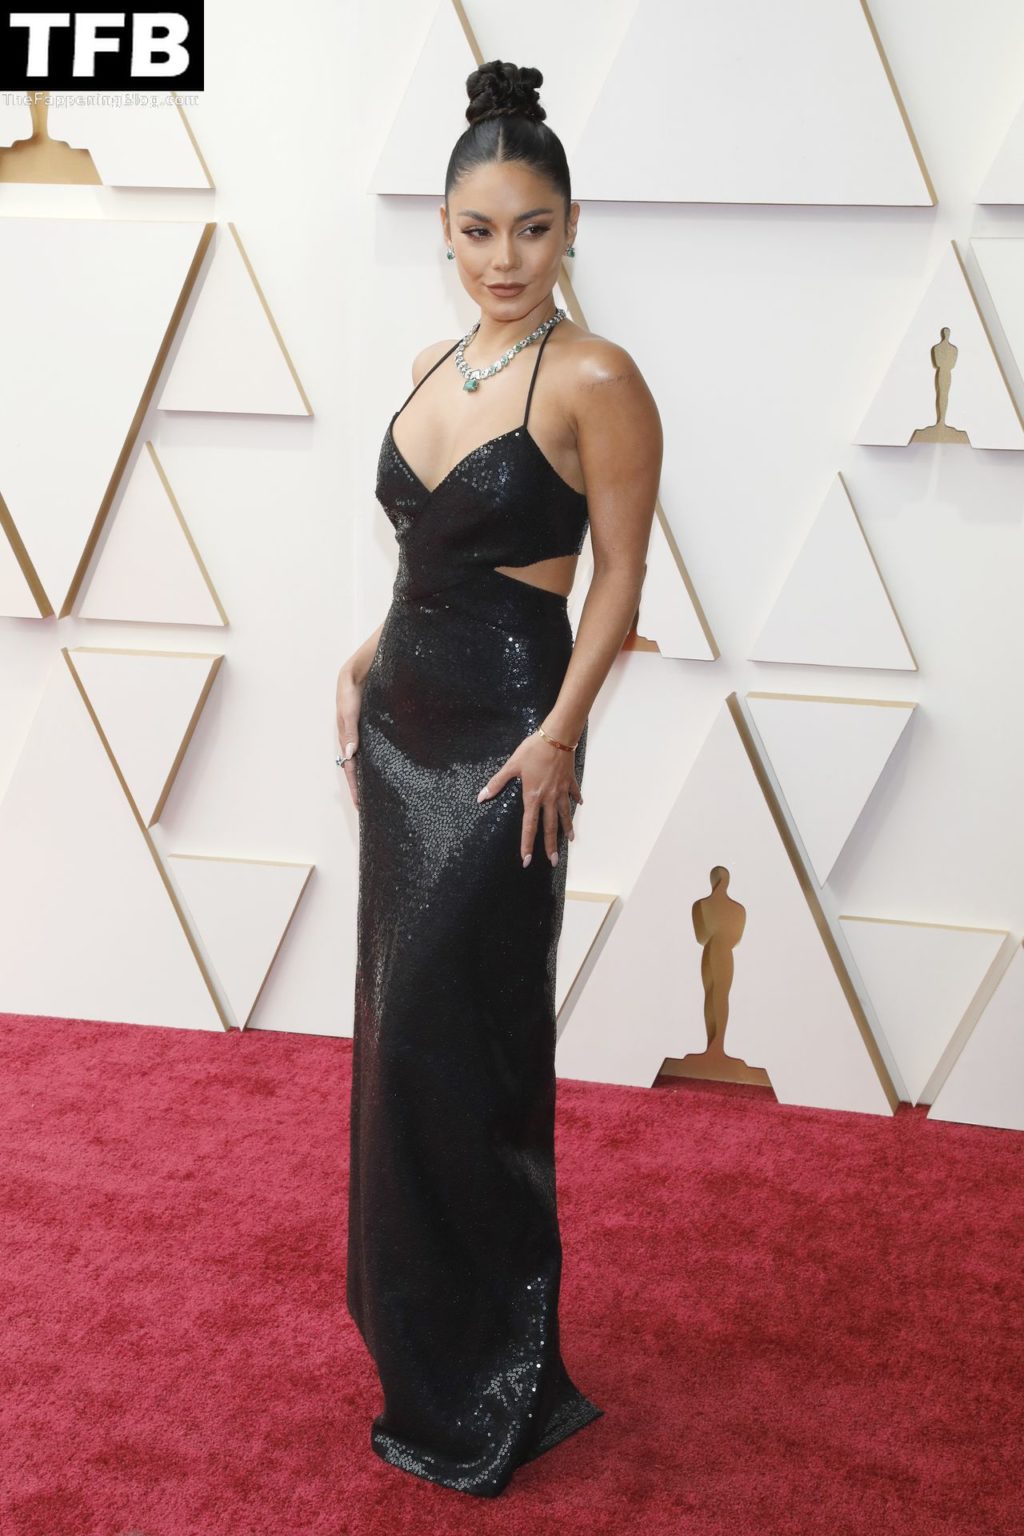 Vanessa Hudgens Sexy The Fappening Blog 77 2 1024x1536 - Vanessa Hudgens Poses on the Red Carpet at the 94th Annual Academy Awards (83 Photos)